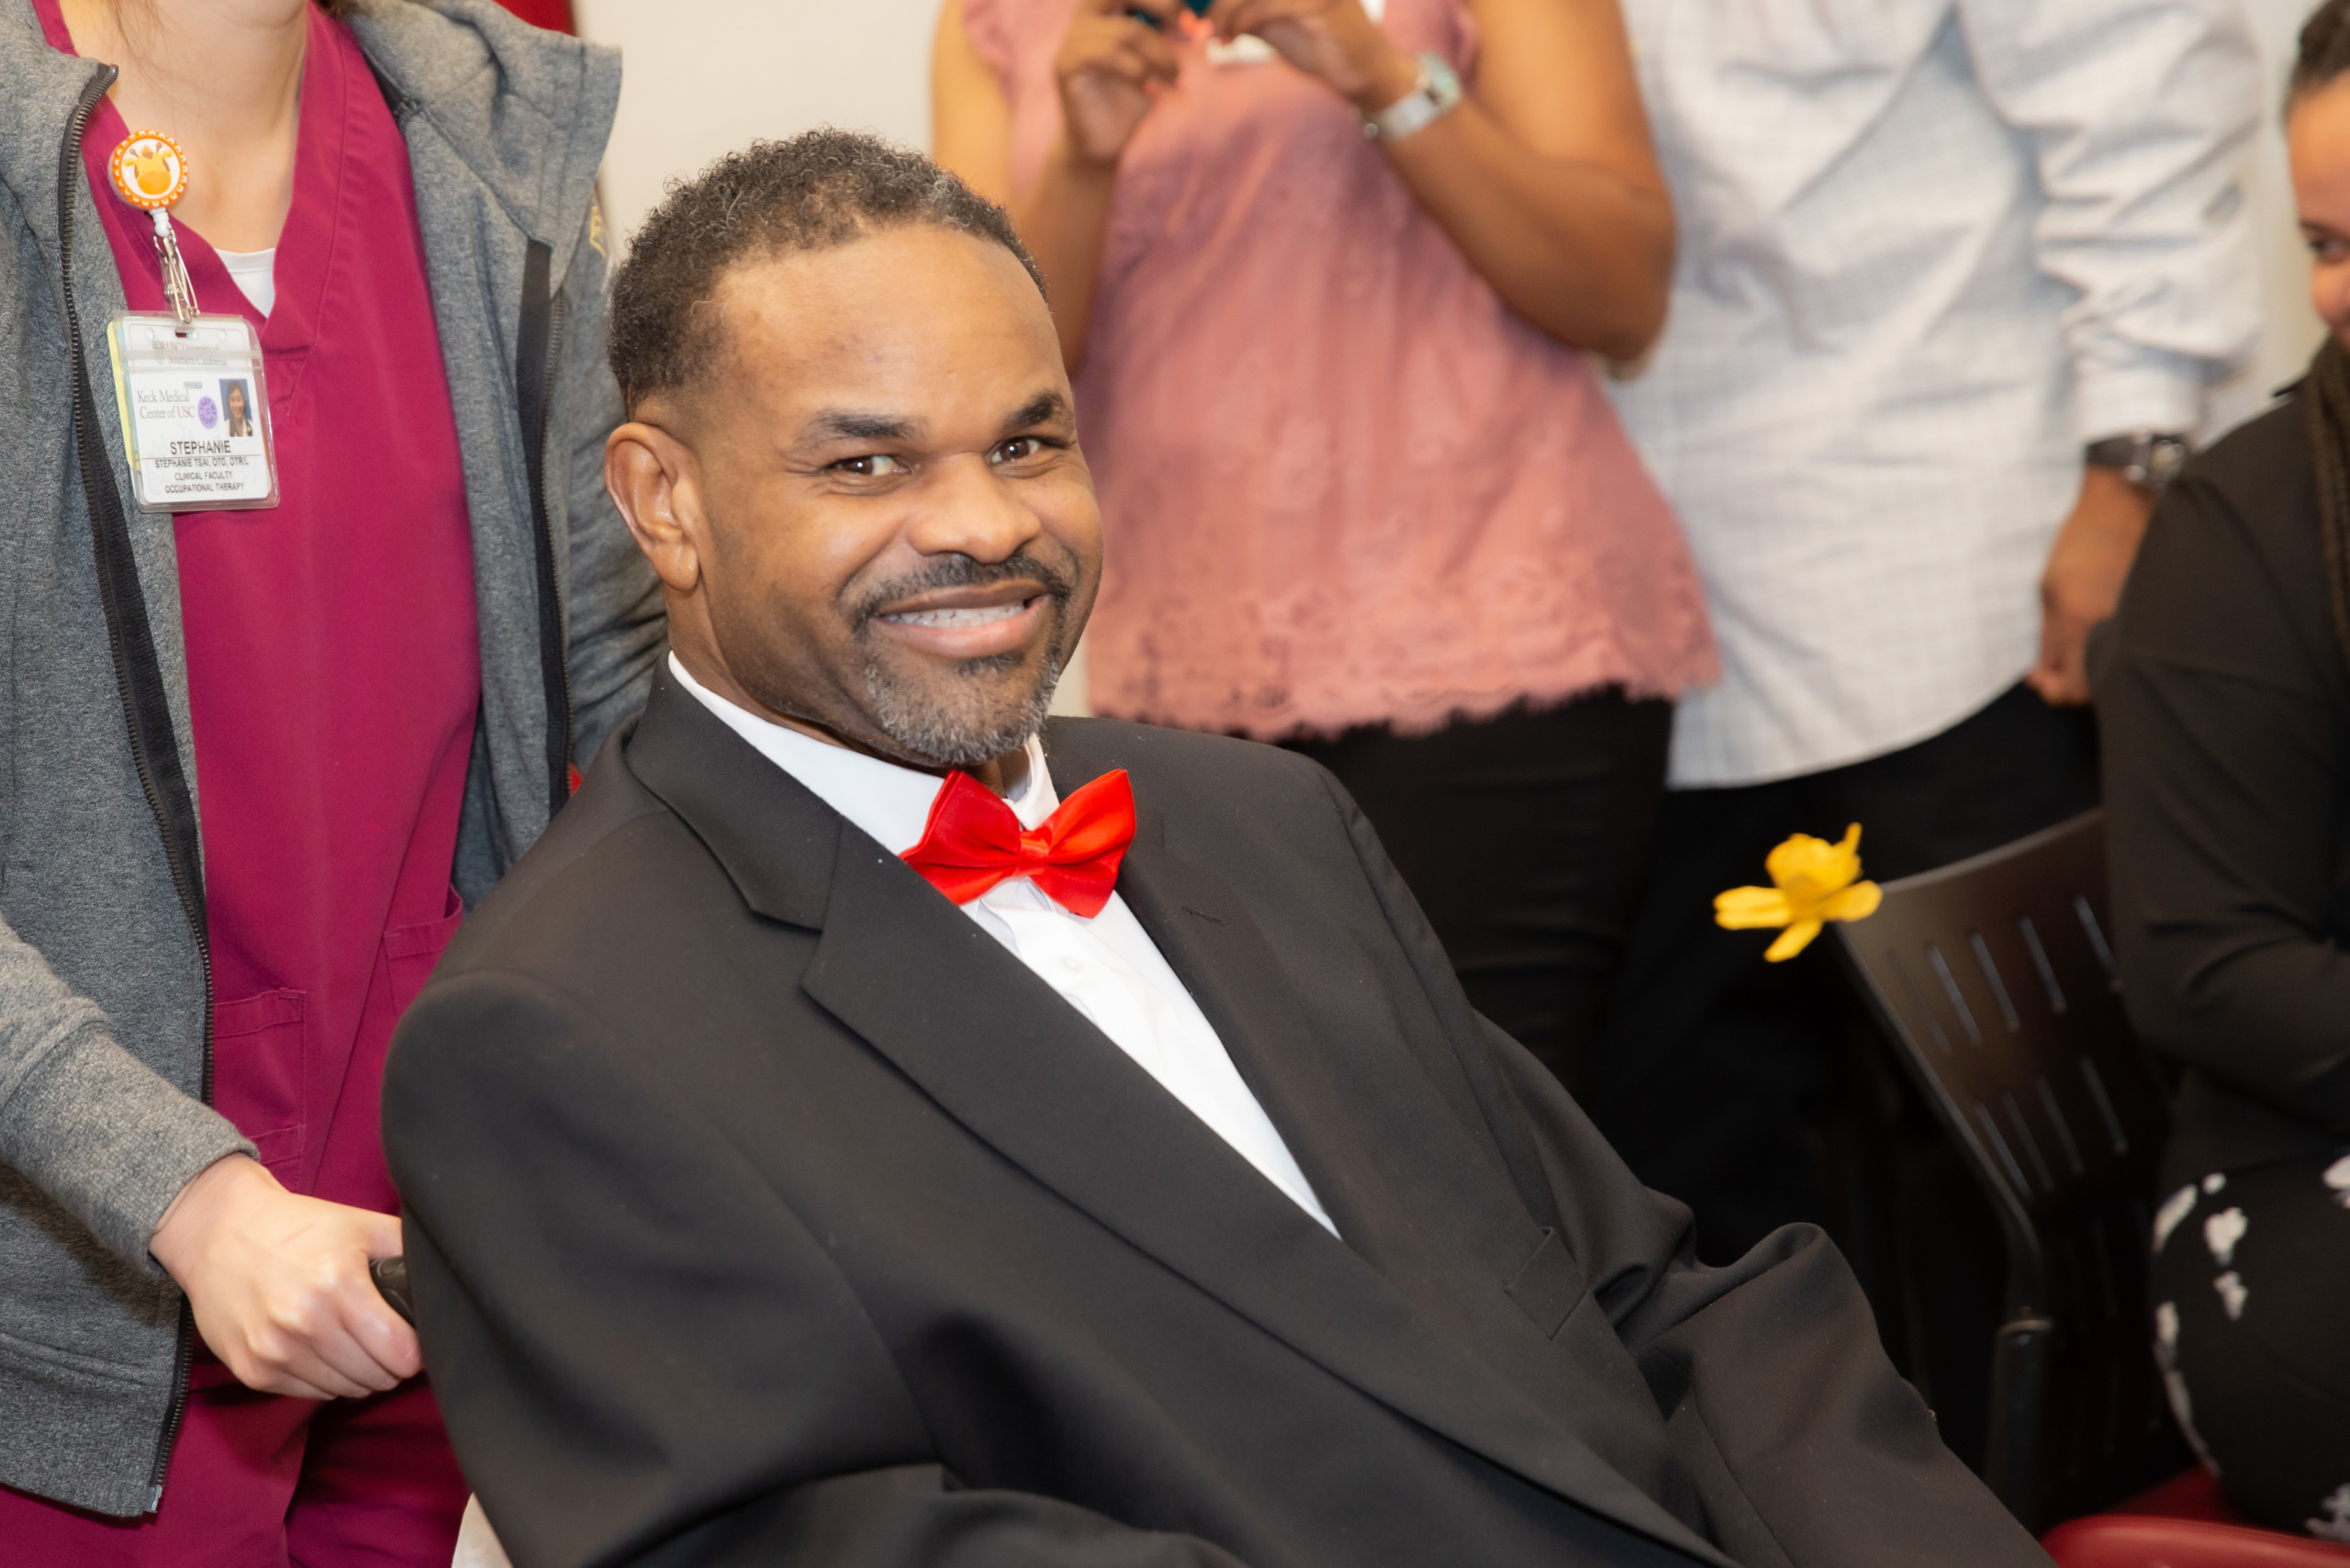 During his eight-month stay at Keck Hospital of USC, Timothy Thomas kept his spirits high through friendship, faith and pure grit.